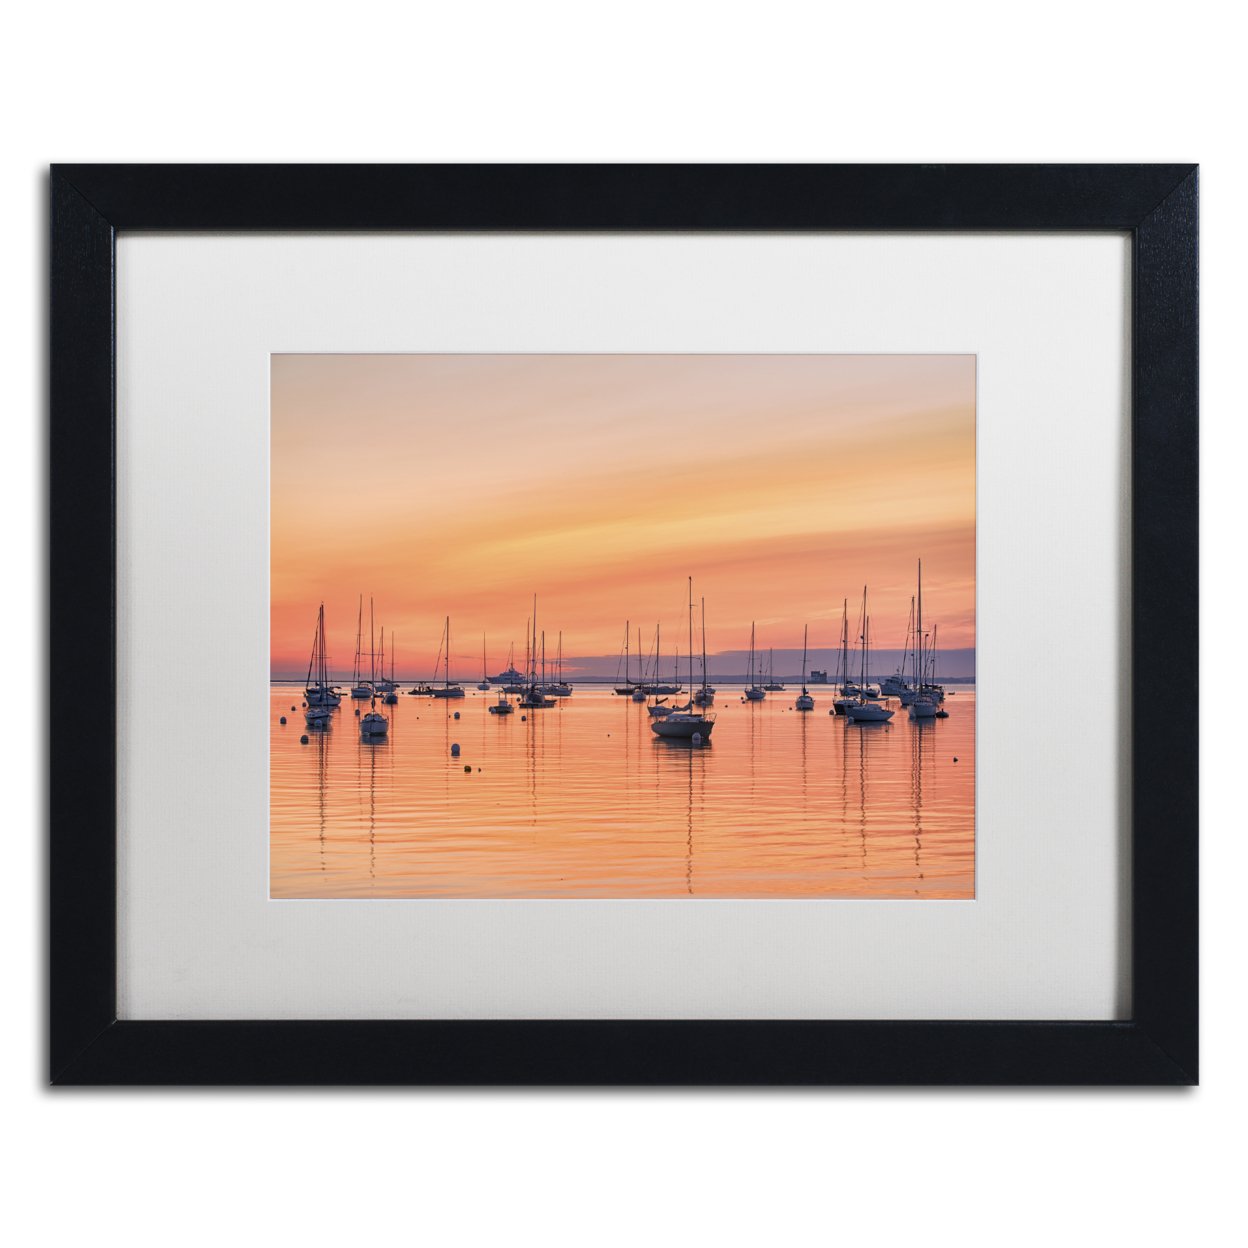 Michael Blanchette Photography 'Pastel Harbor' Black Wooden Framed Art 18 X 22 Inches